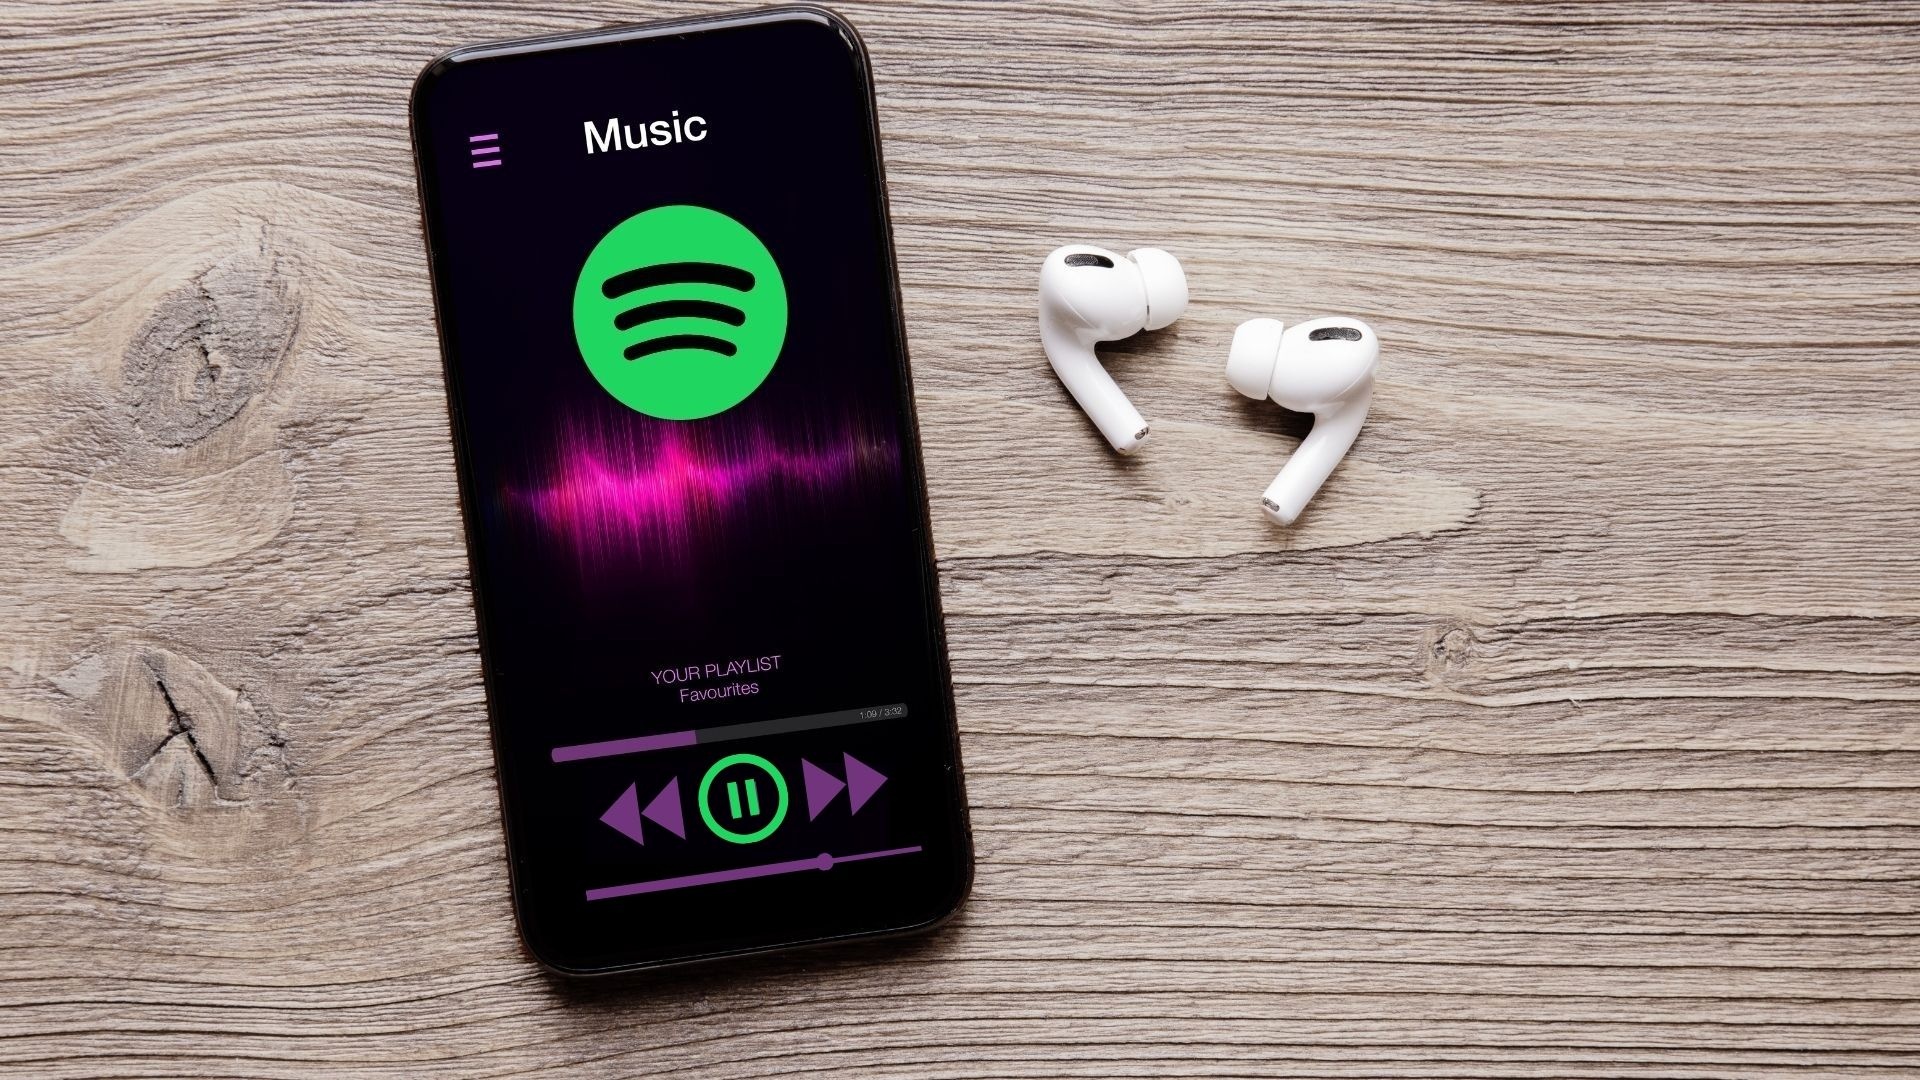 Spotify: A music streaming app for Android and iOS devices, Tracks from major and minor record labels. 1920x1080 Full HD Wallpaper.